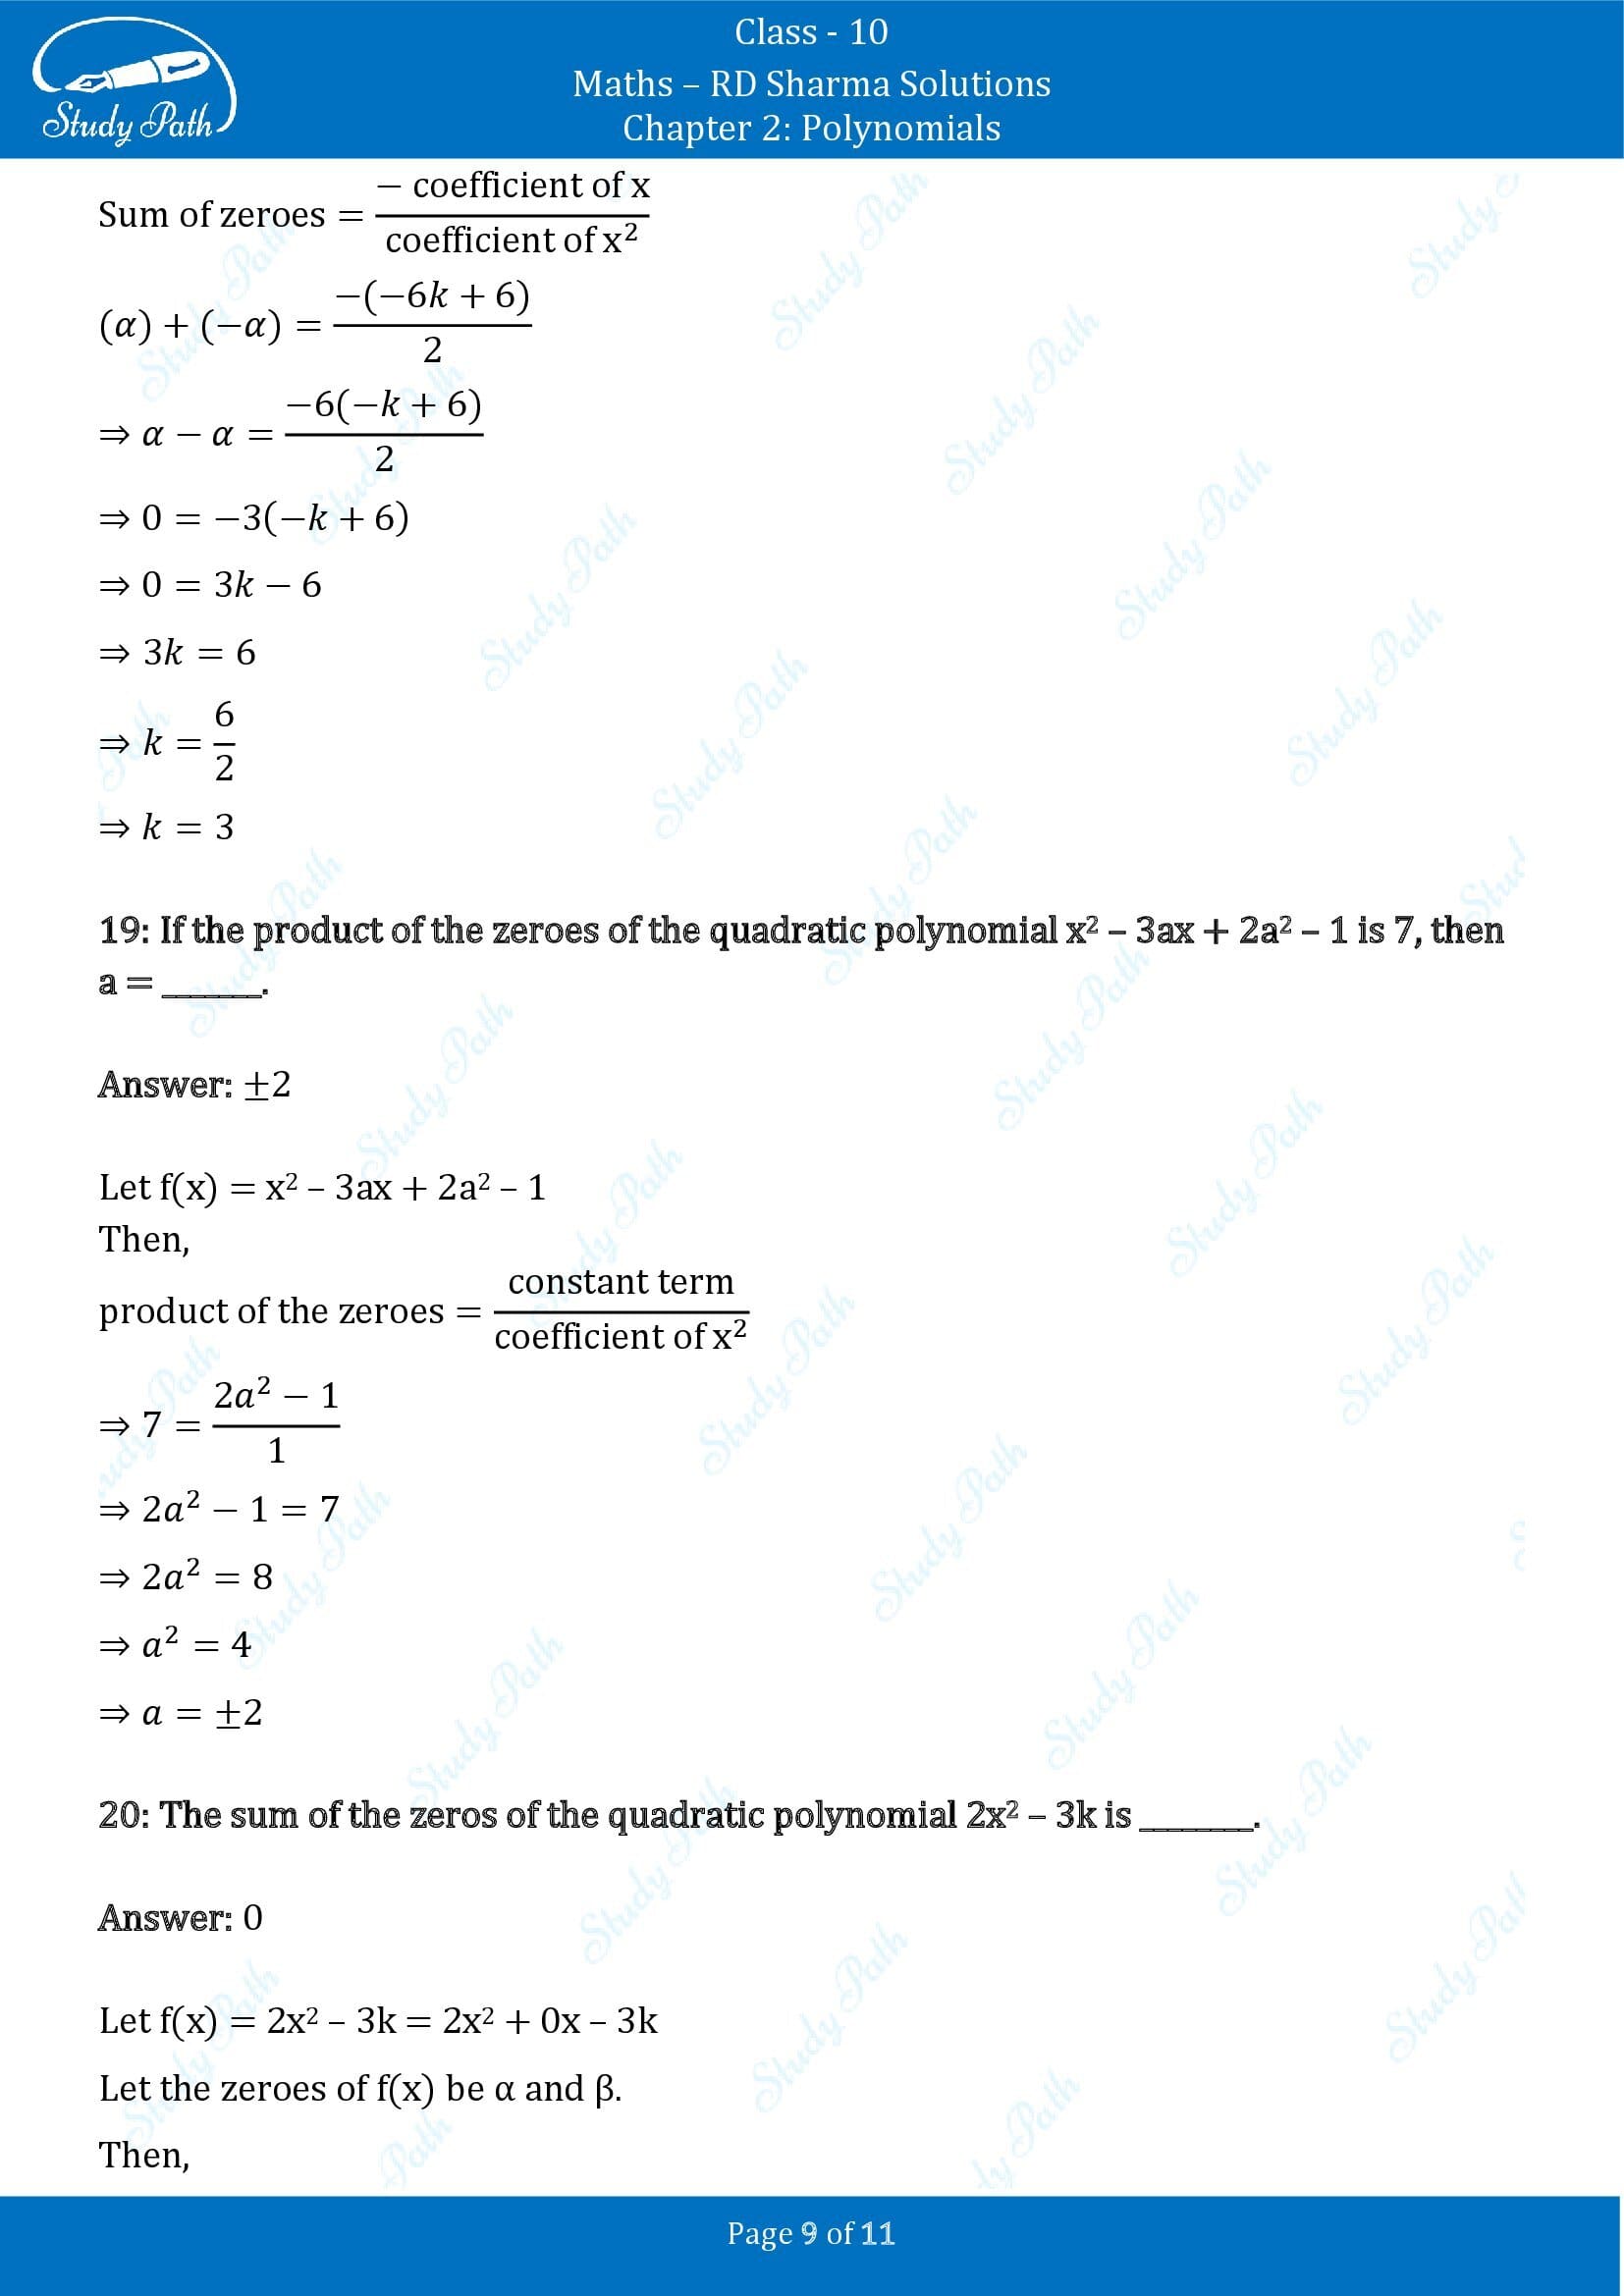 RD Sharma Solutions Class 10 Chapter 2 Polynomials Fill in the Blank Type Questions FBQs 00009